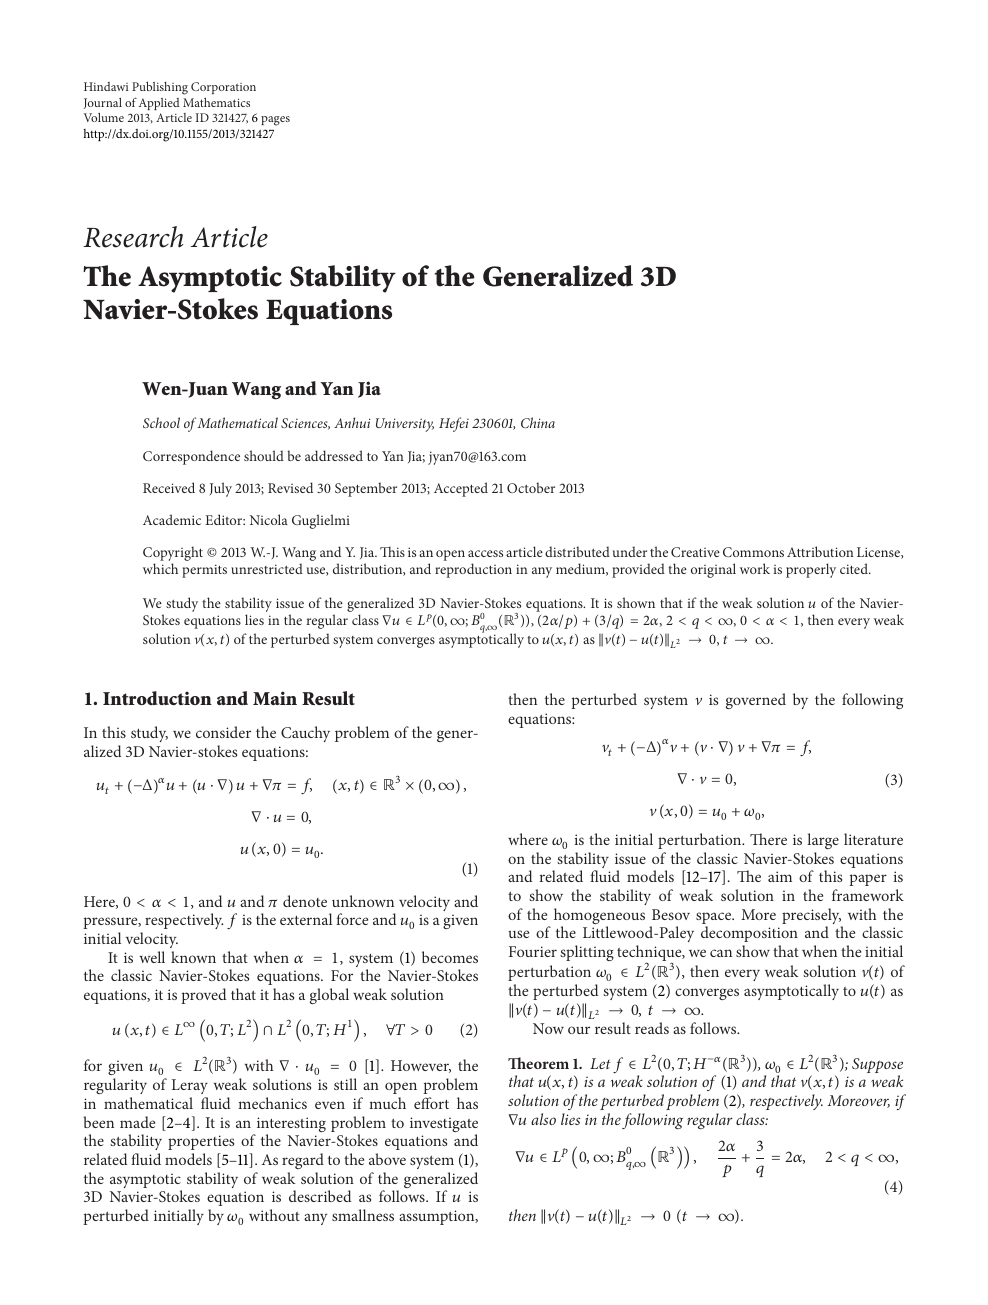 The Asymptotic Stability Of The Generalized 3d Navier Stokes Equations Topic Of Research Paper In Mathematics Download Scholarly Article Pdf And Read For Free On Cyberleninka Open Science Hub